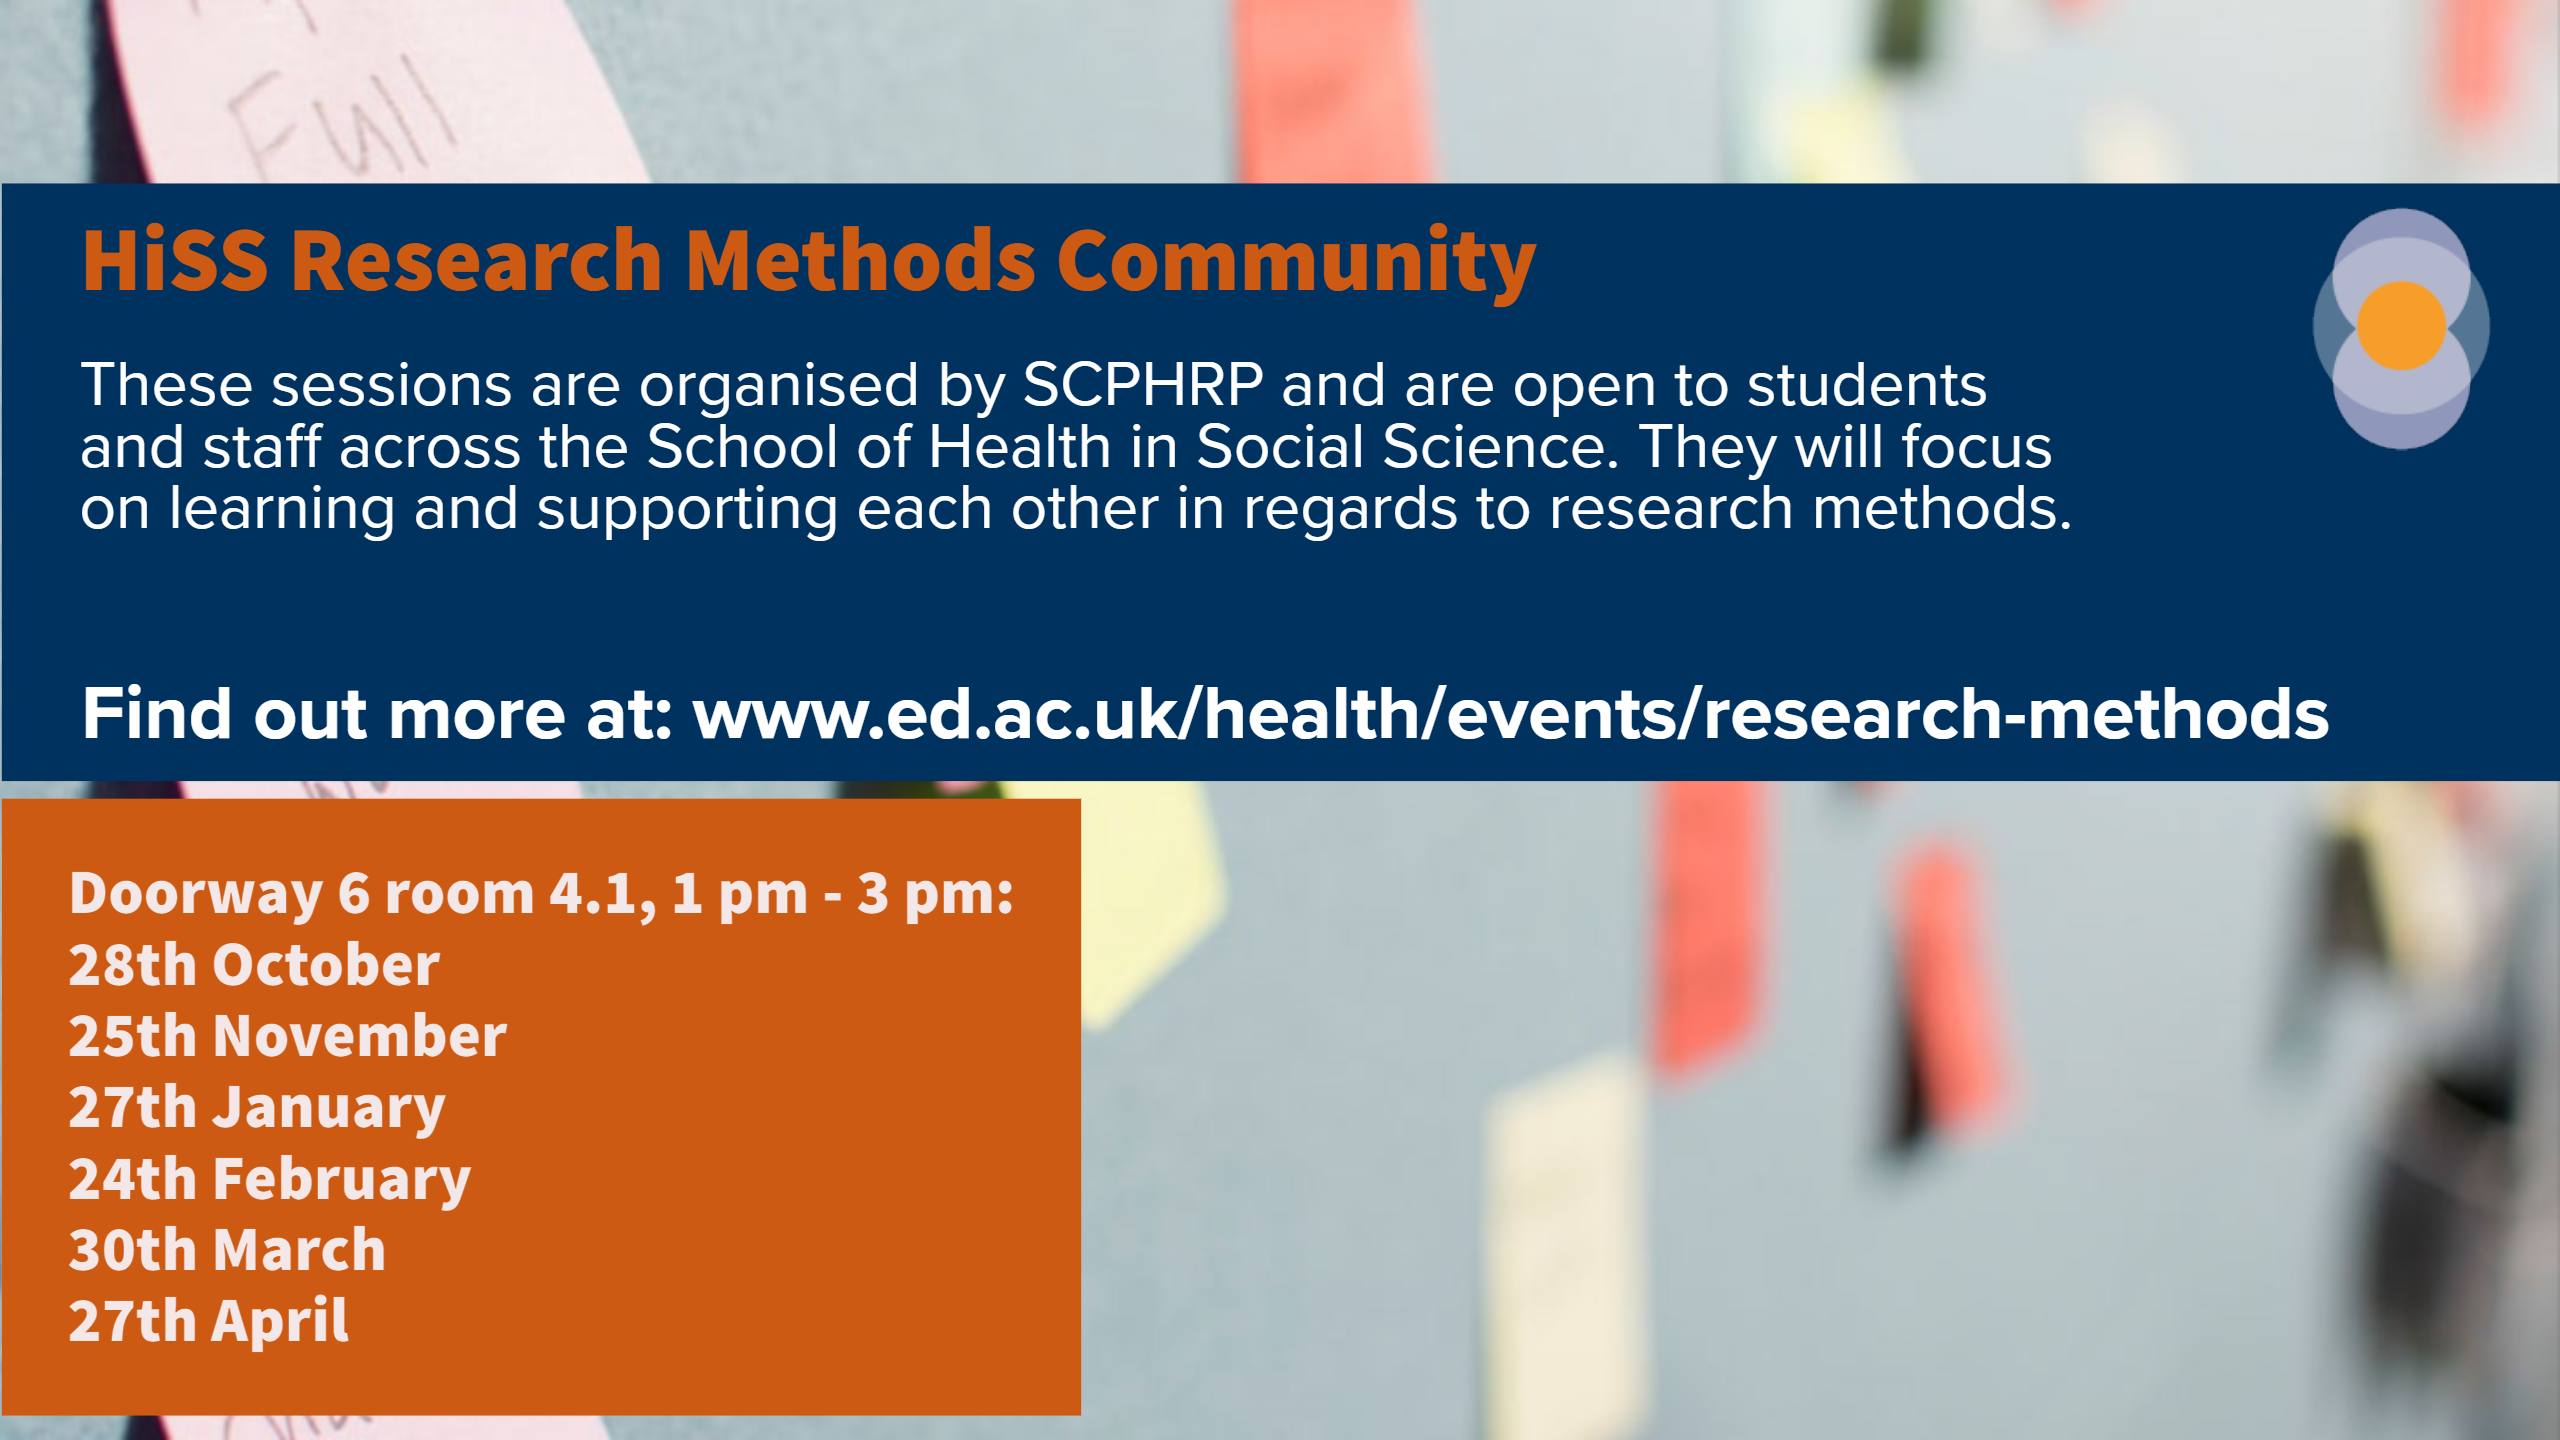 HiSS research methods community